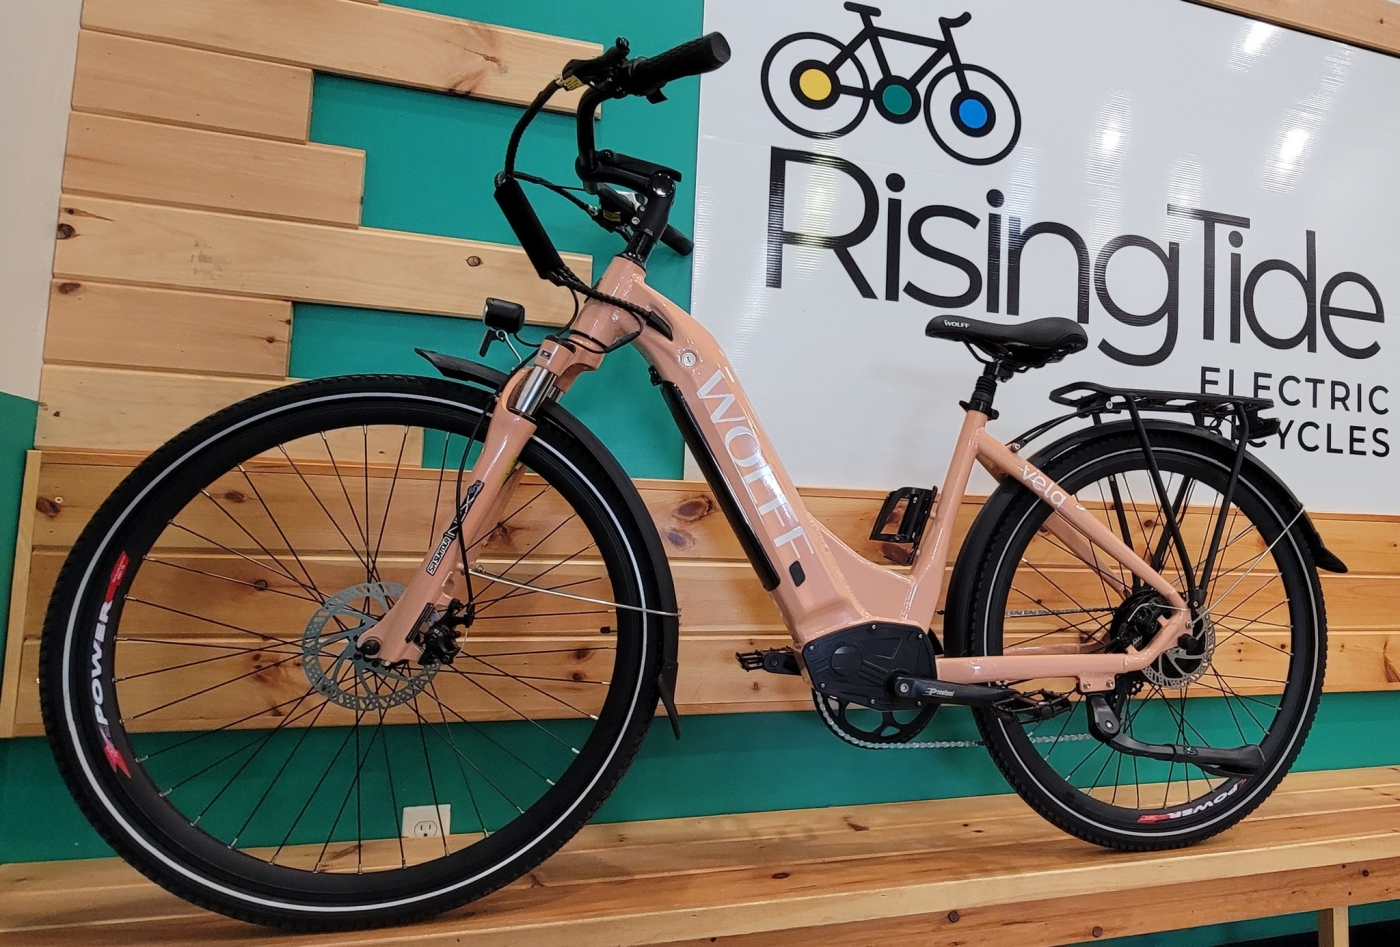 A blush pink electric bike stands in front of a Rising Tide Electric Bikes banner indoors